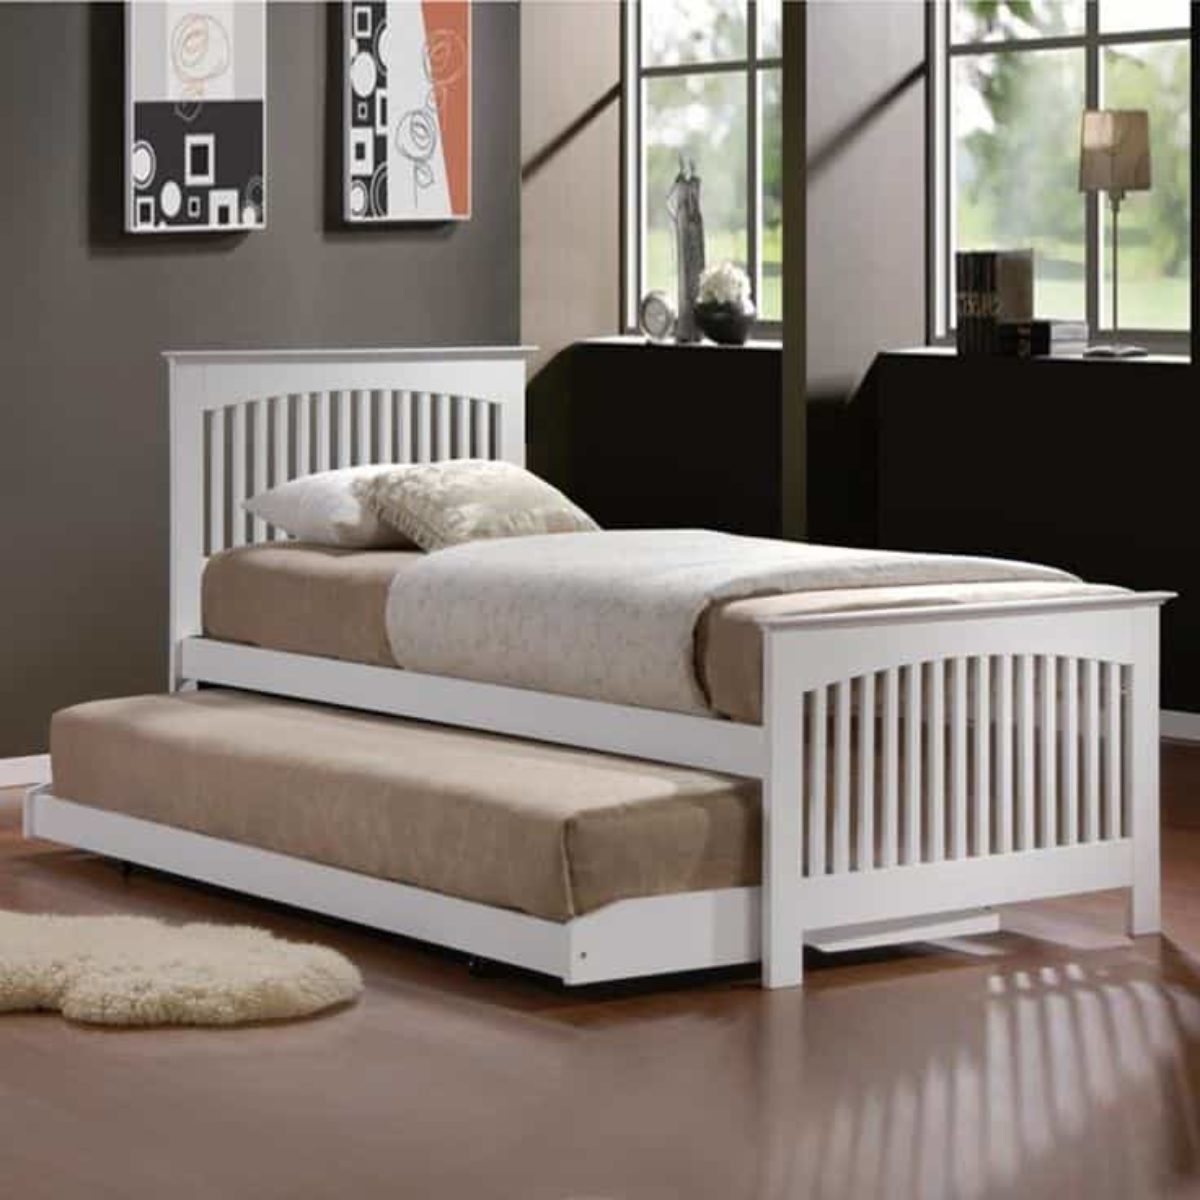 What Is A Trundle Bed, Can A Trundle Fit Under Twin Bed